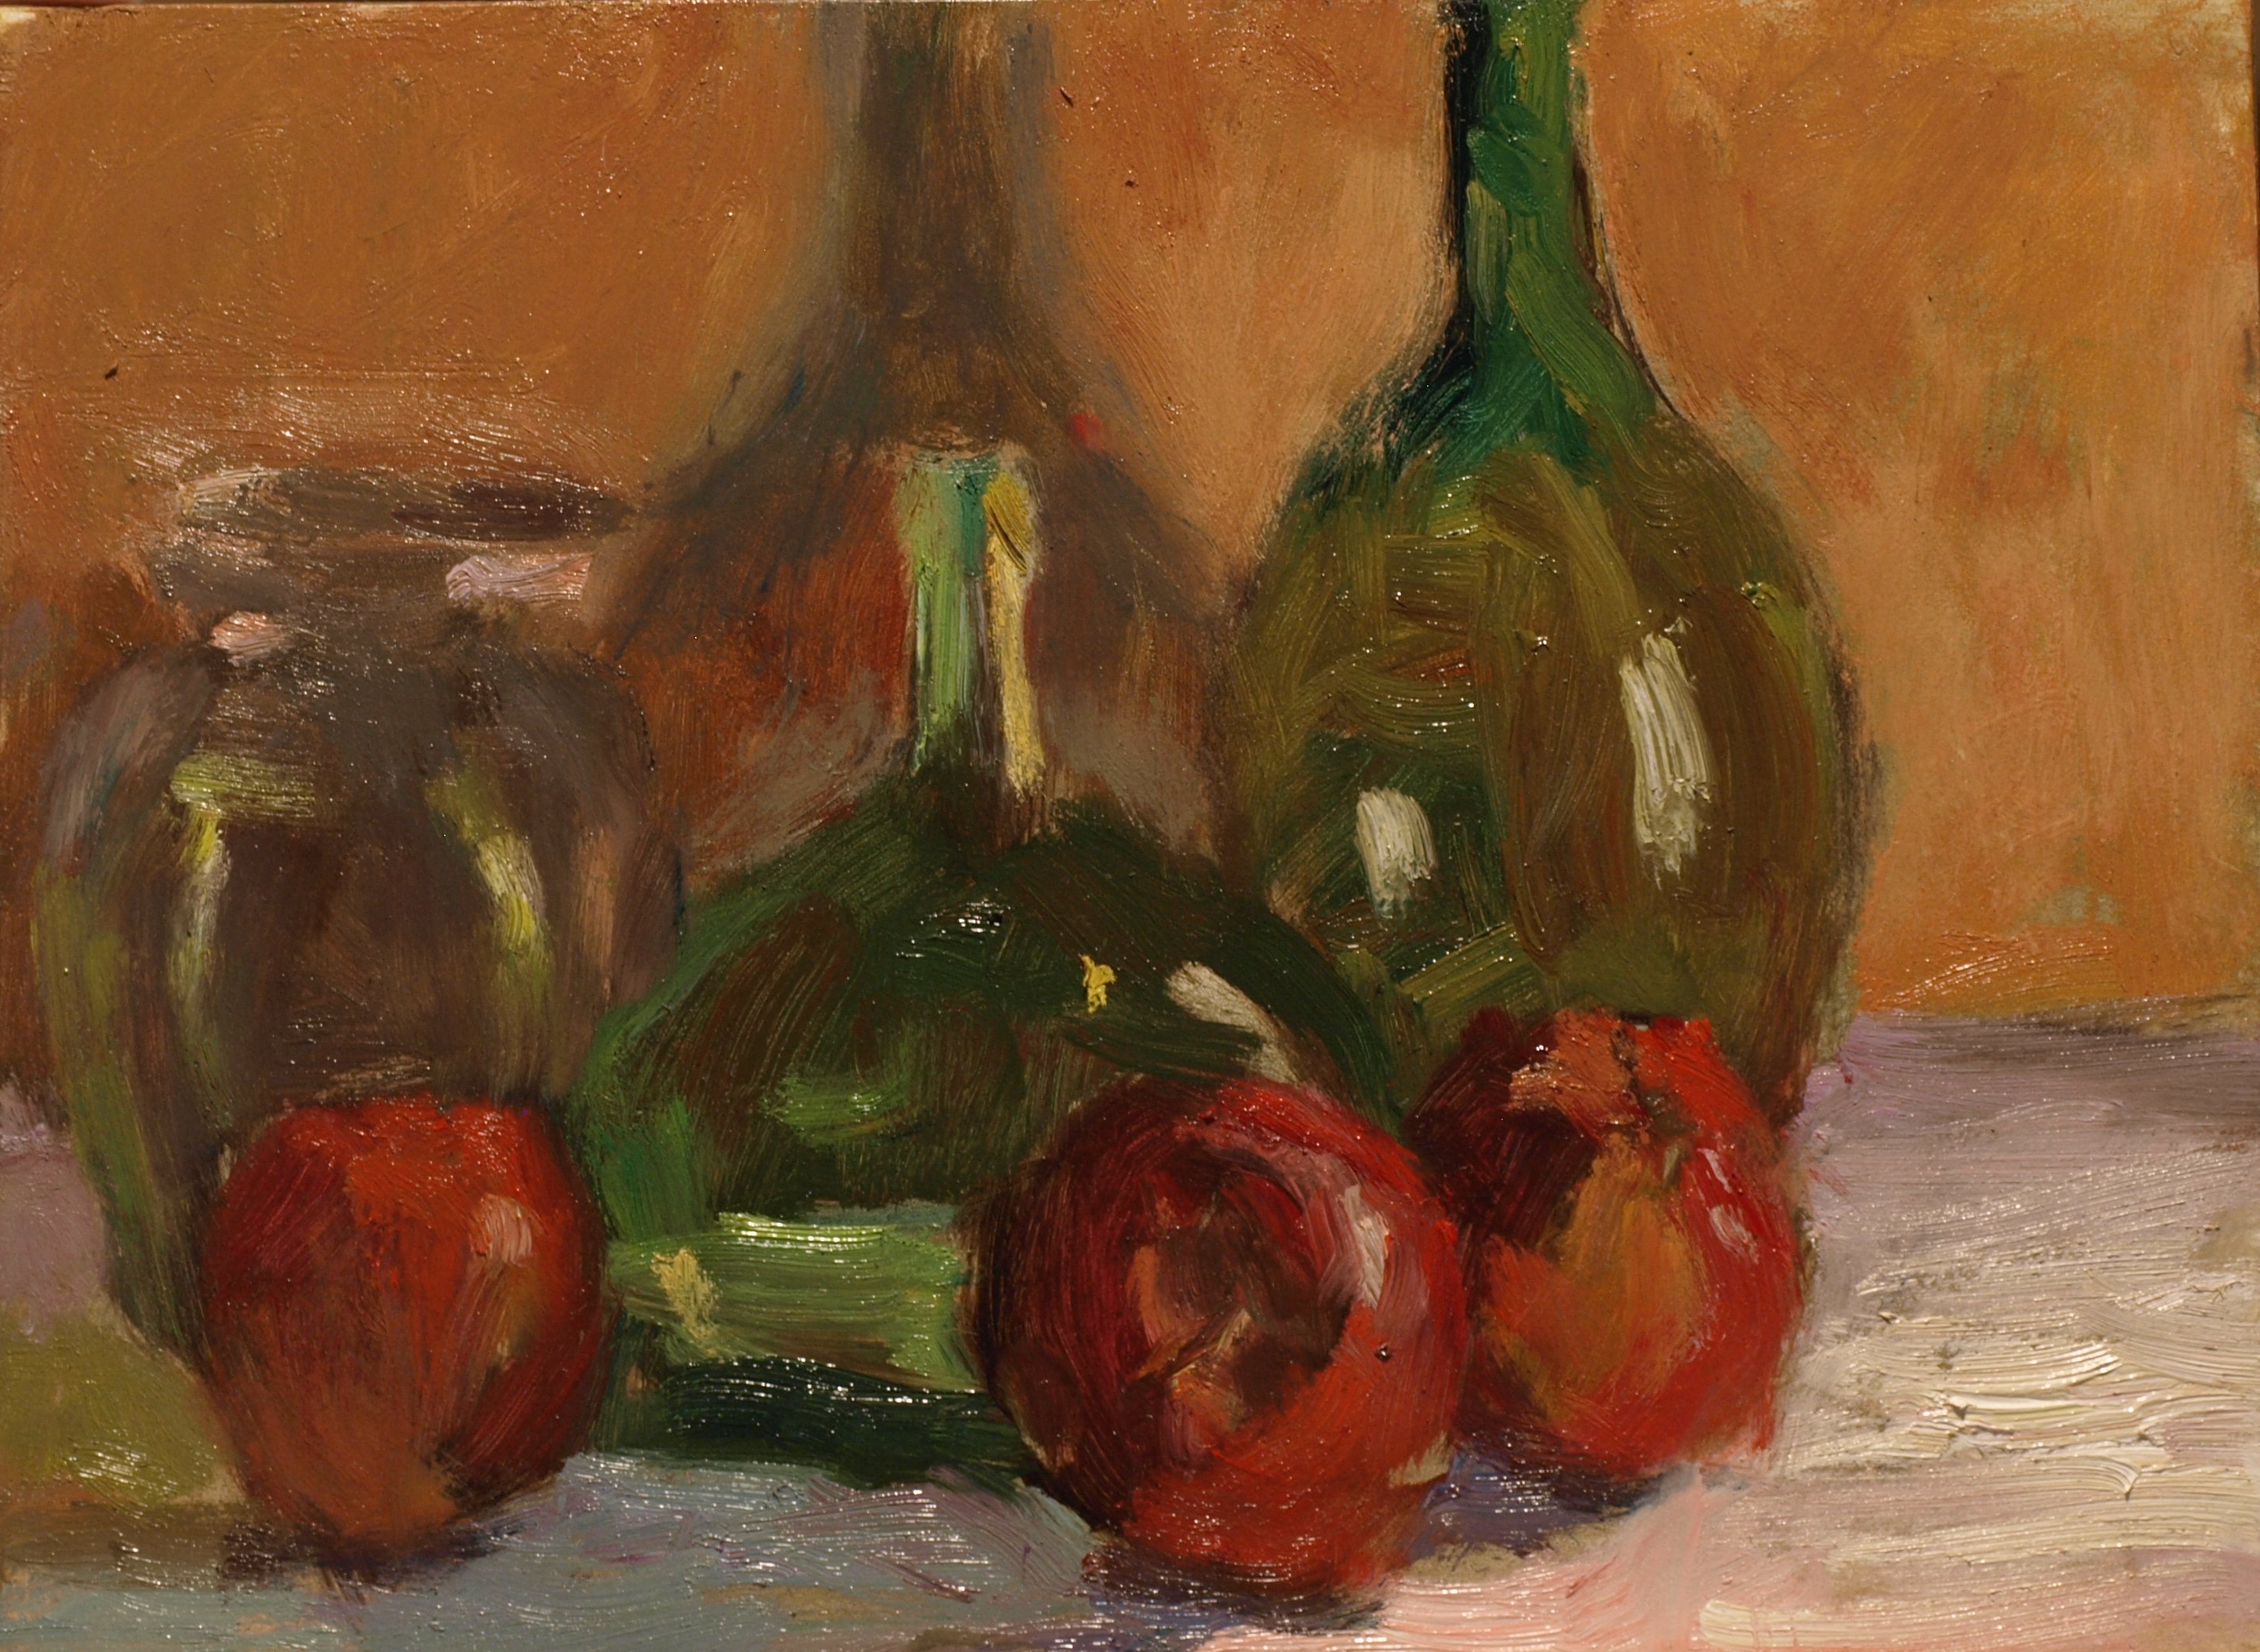 Bottles and Apples, Oil on Panel, 9 x 12 Inches, by Richard Stalter, $220